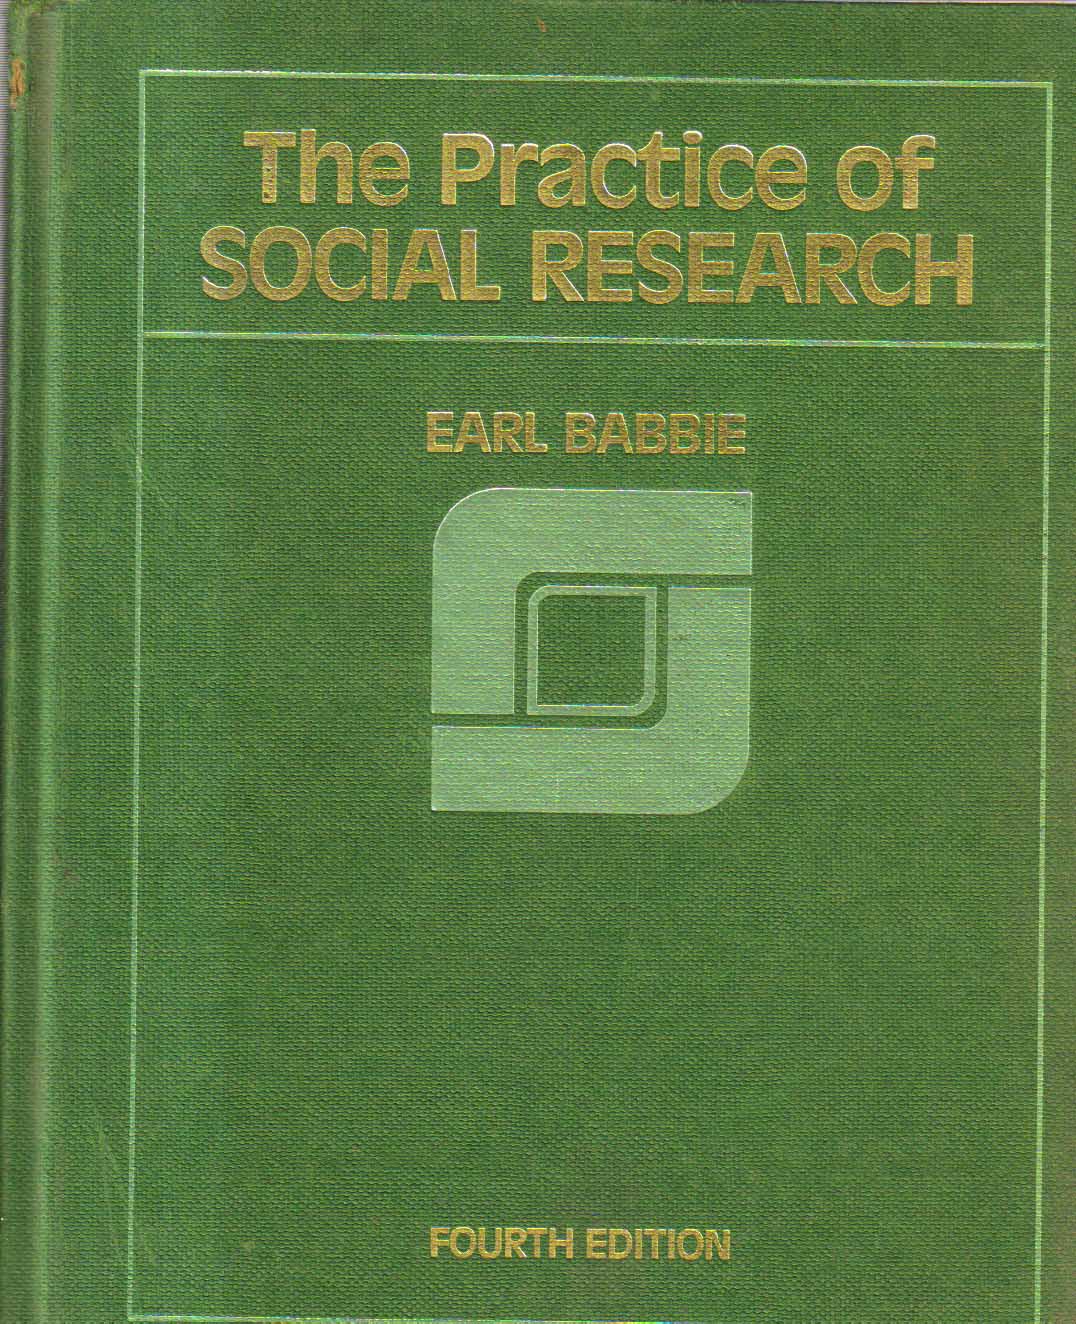 The Practice of Social Research.